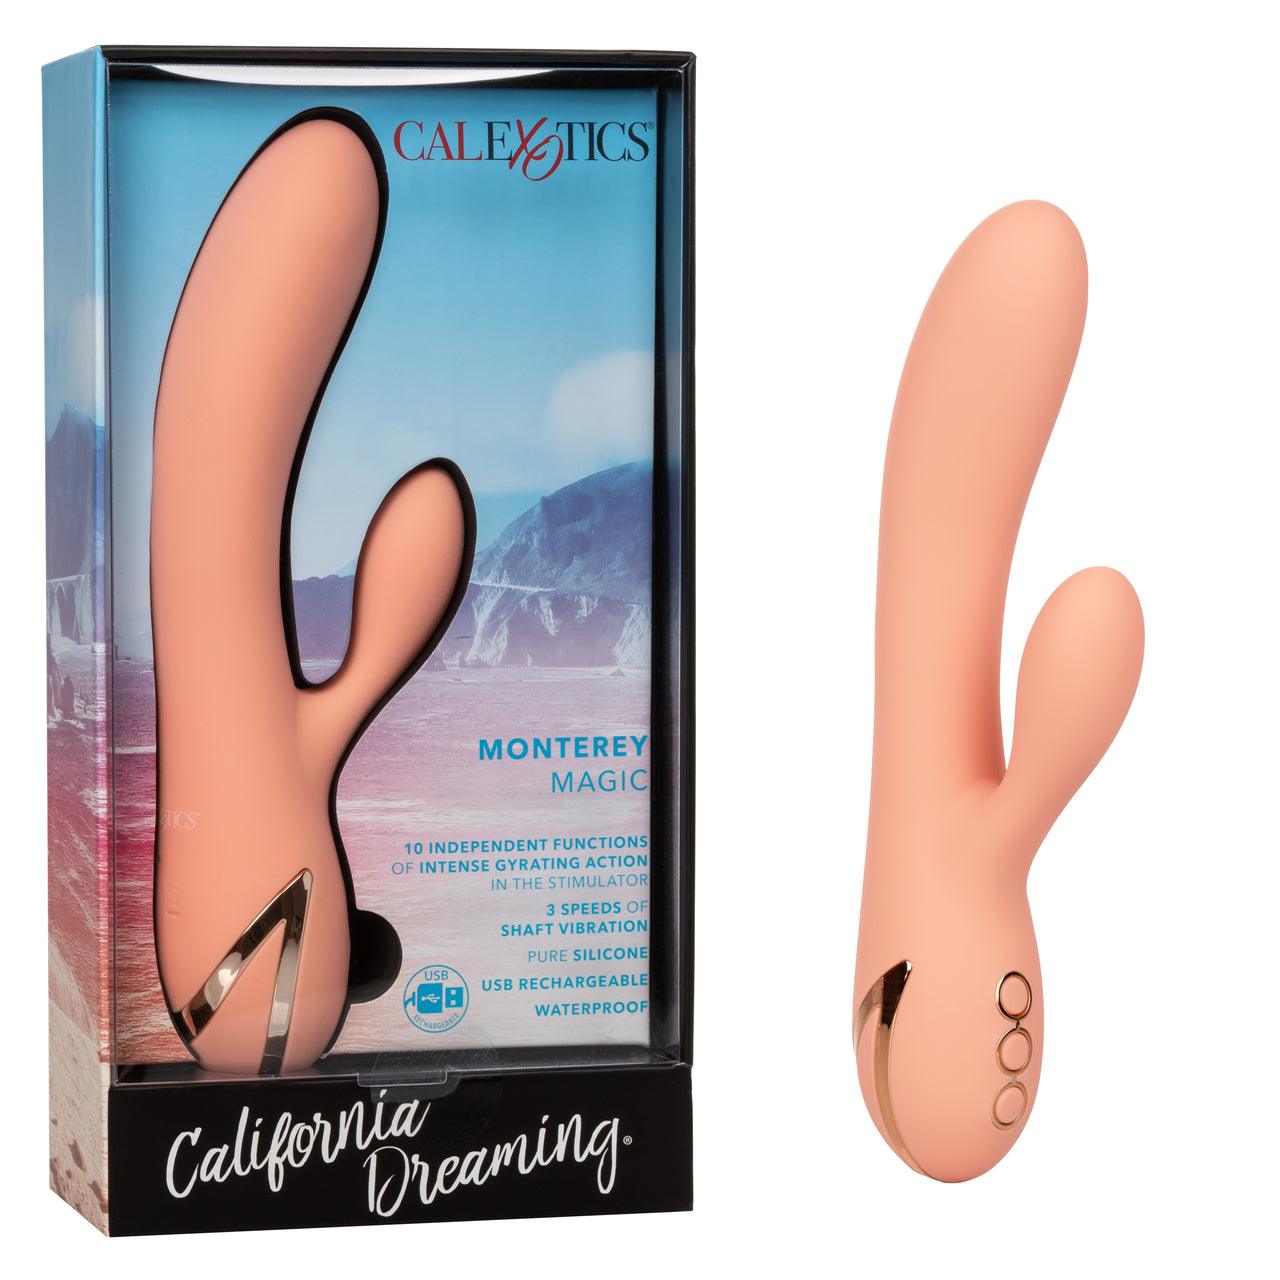 Calexotics California Dreaming Monterey Magic - Buy At Luxury Toy X - Free 3-Day Shipping